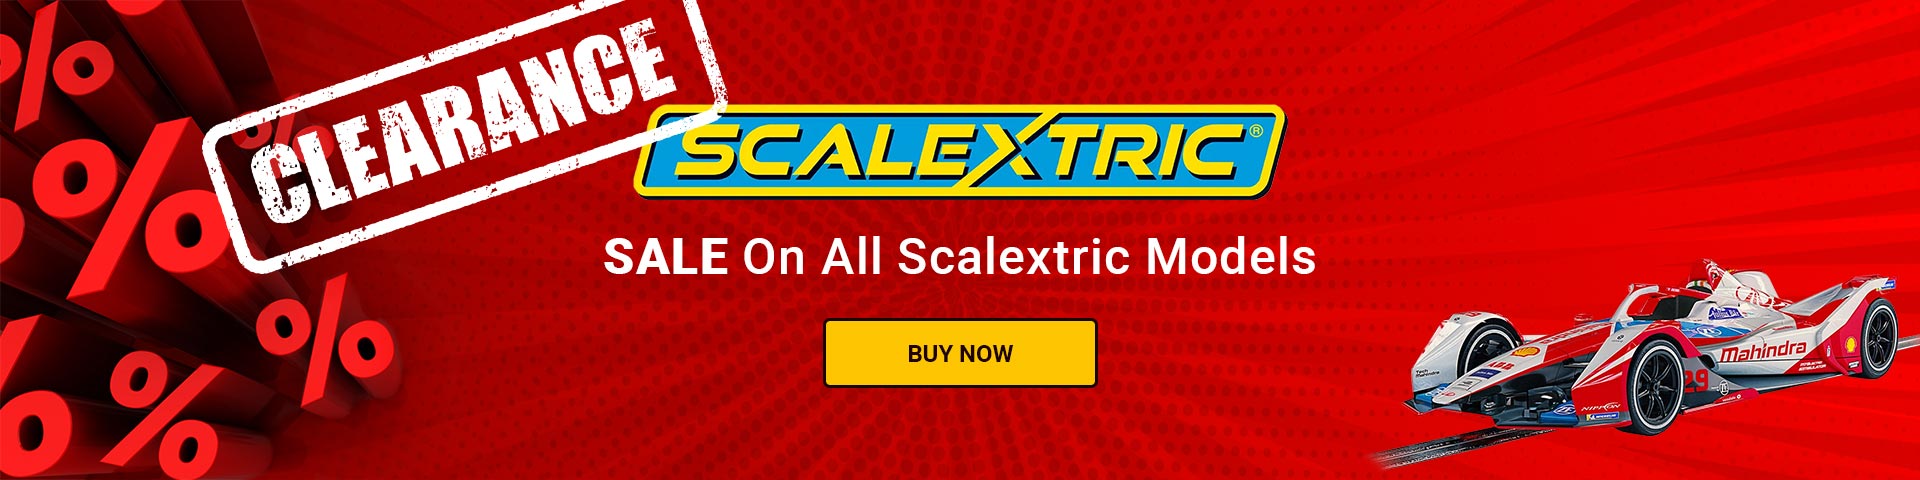 Shop the clearance sale for all Scalextric models